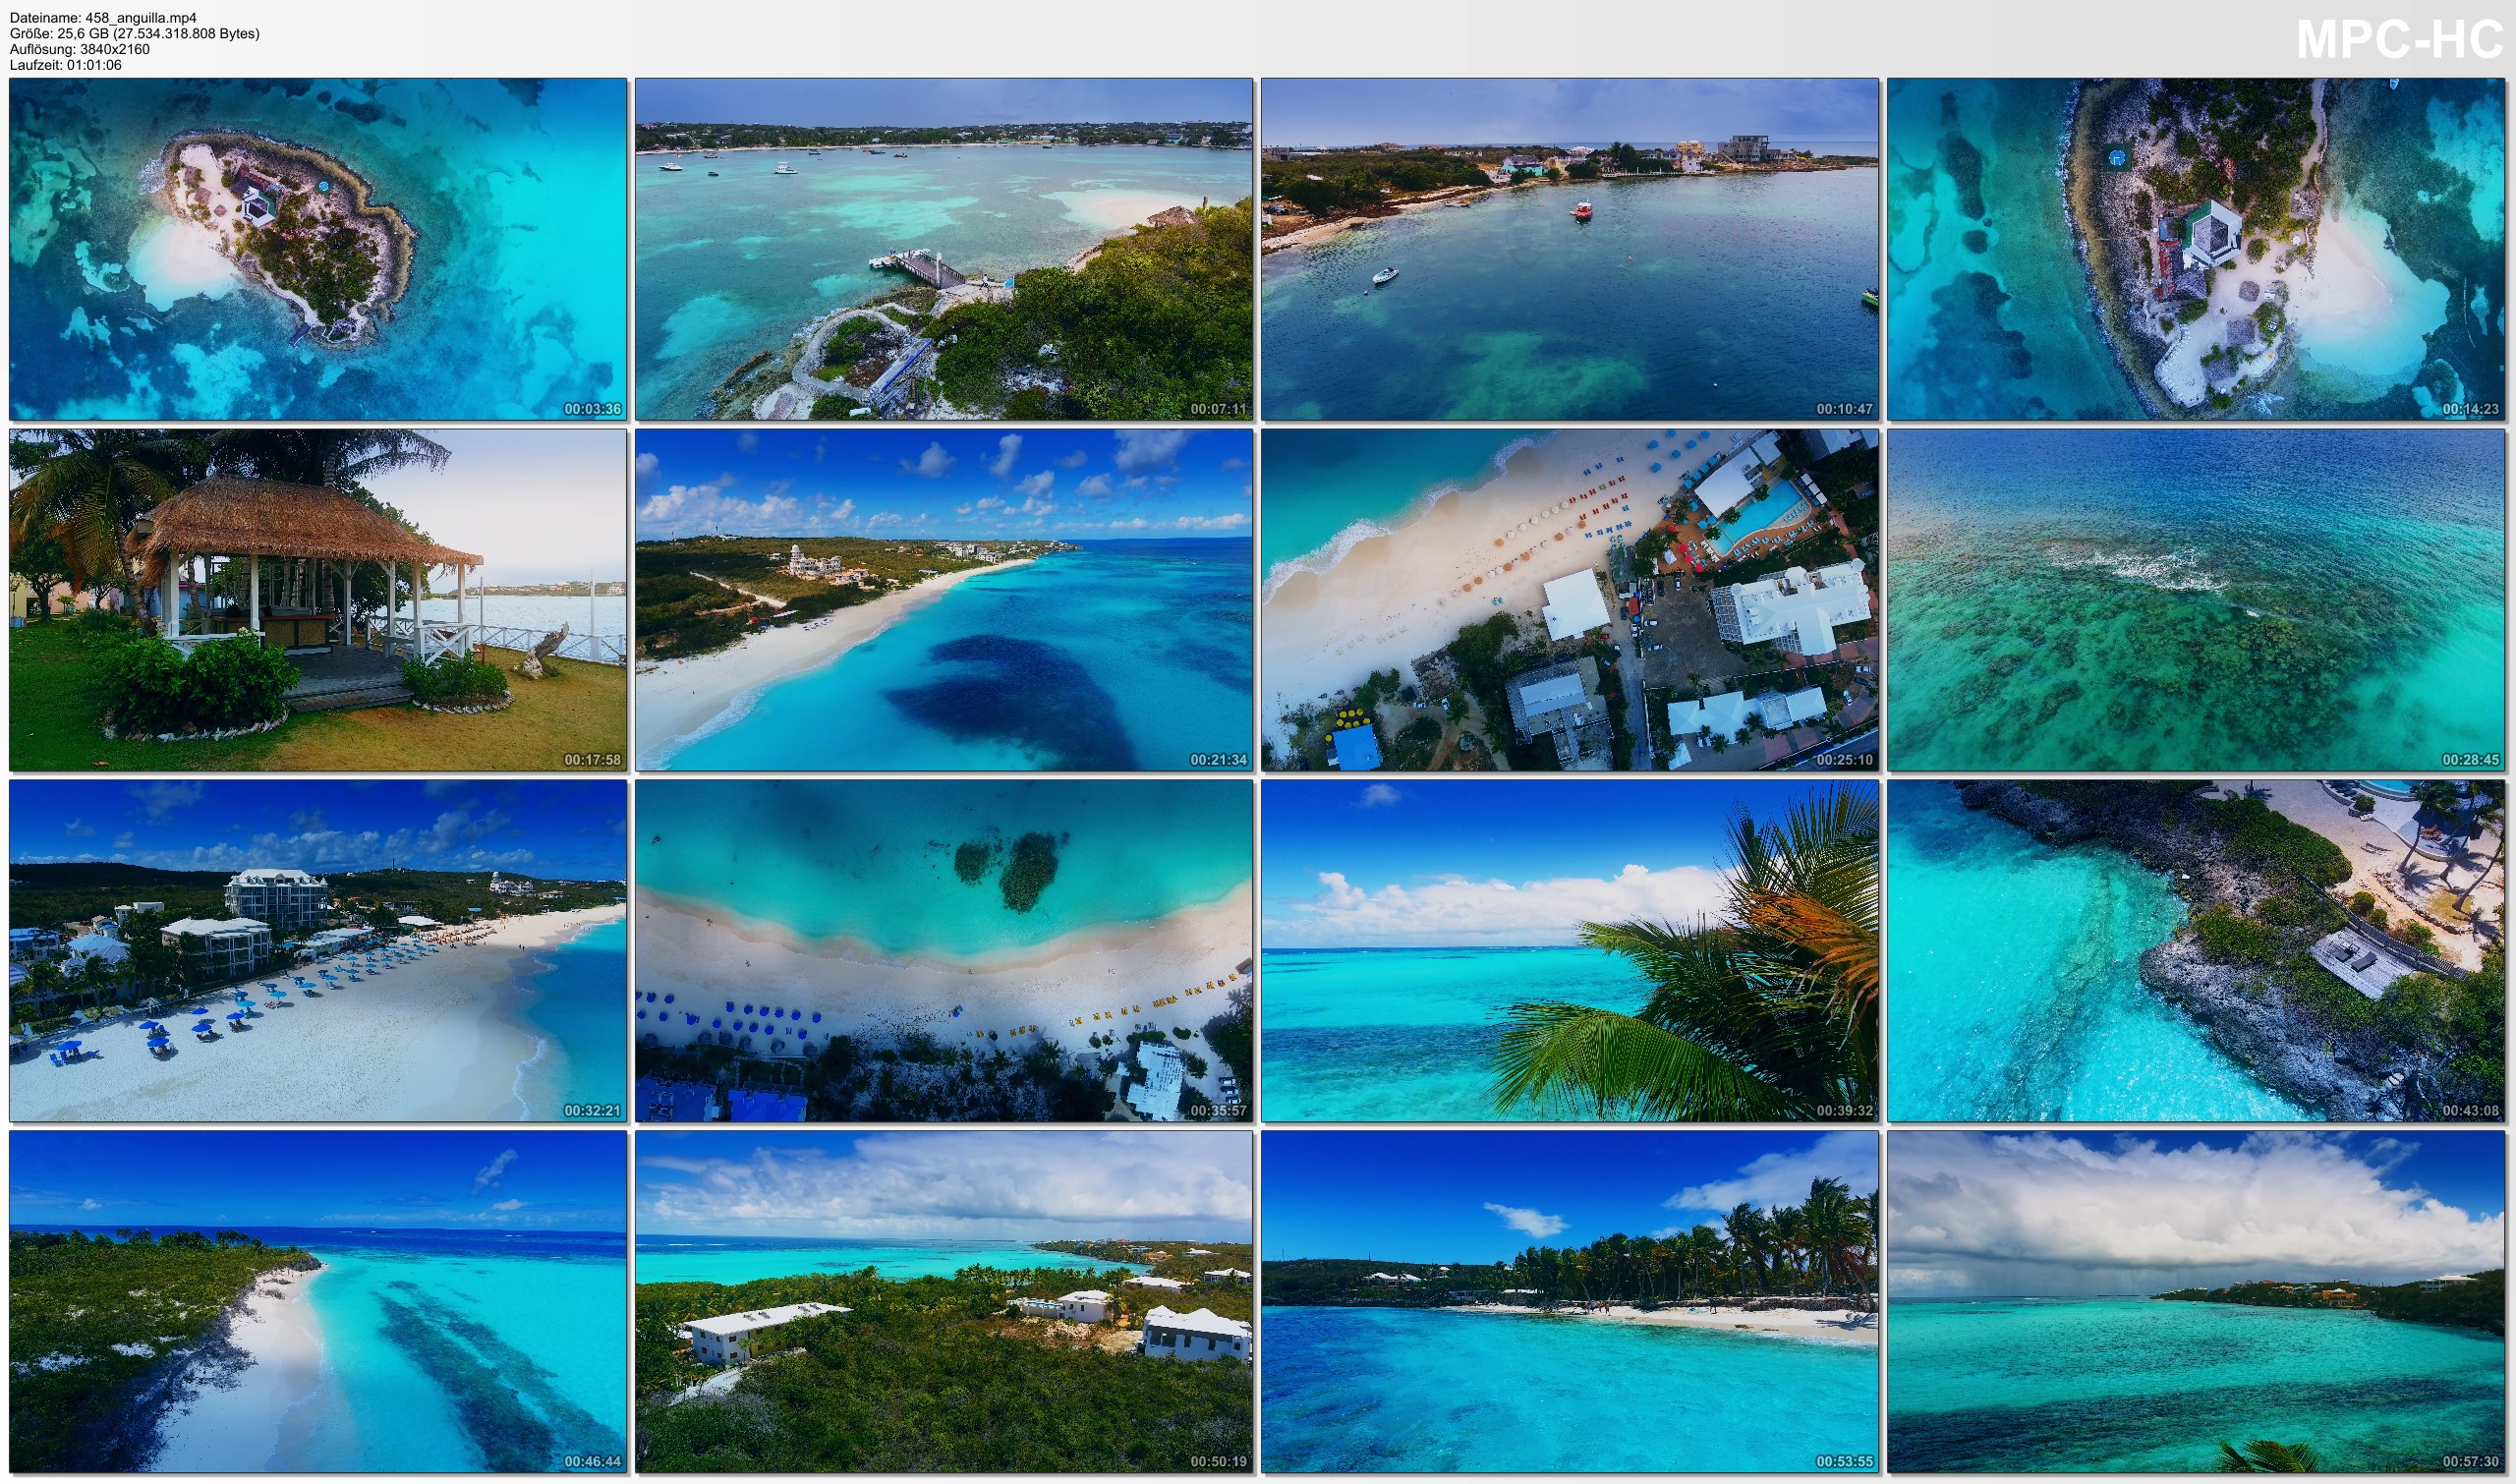 Drone Pictures from Video 【4K】Drone RAW Footage | This is ANGUILLA 2020 | Caribbean | Shoal Bay and More | UltraHD Stock Video